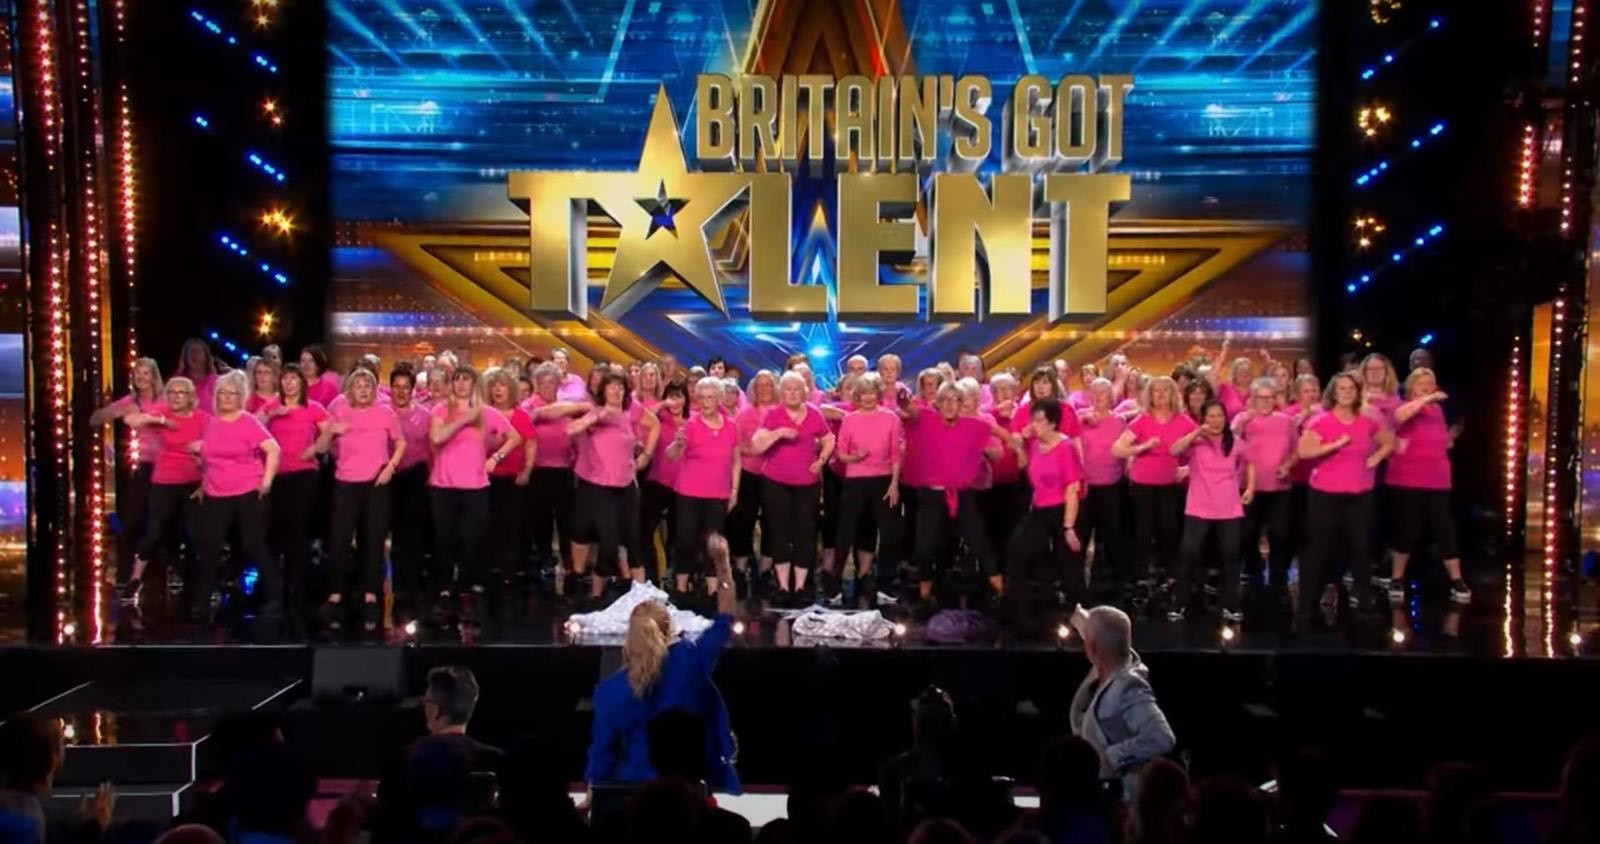 The team of Midlife Movers on Britain's Got Talent